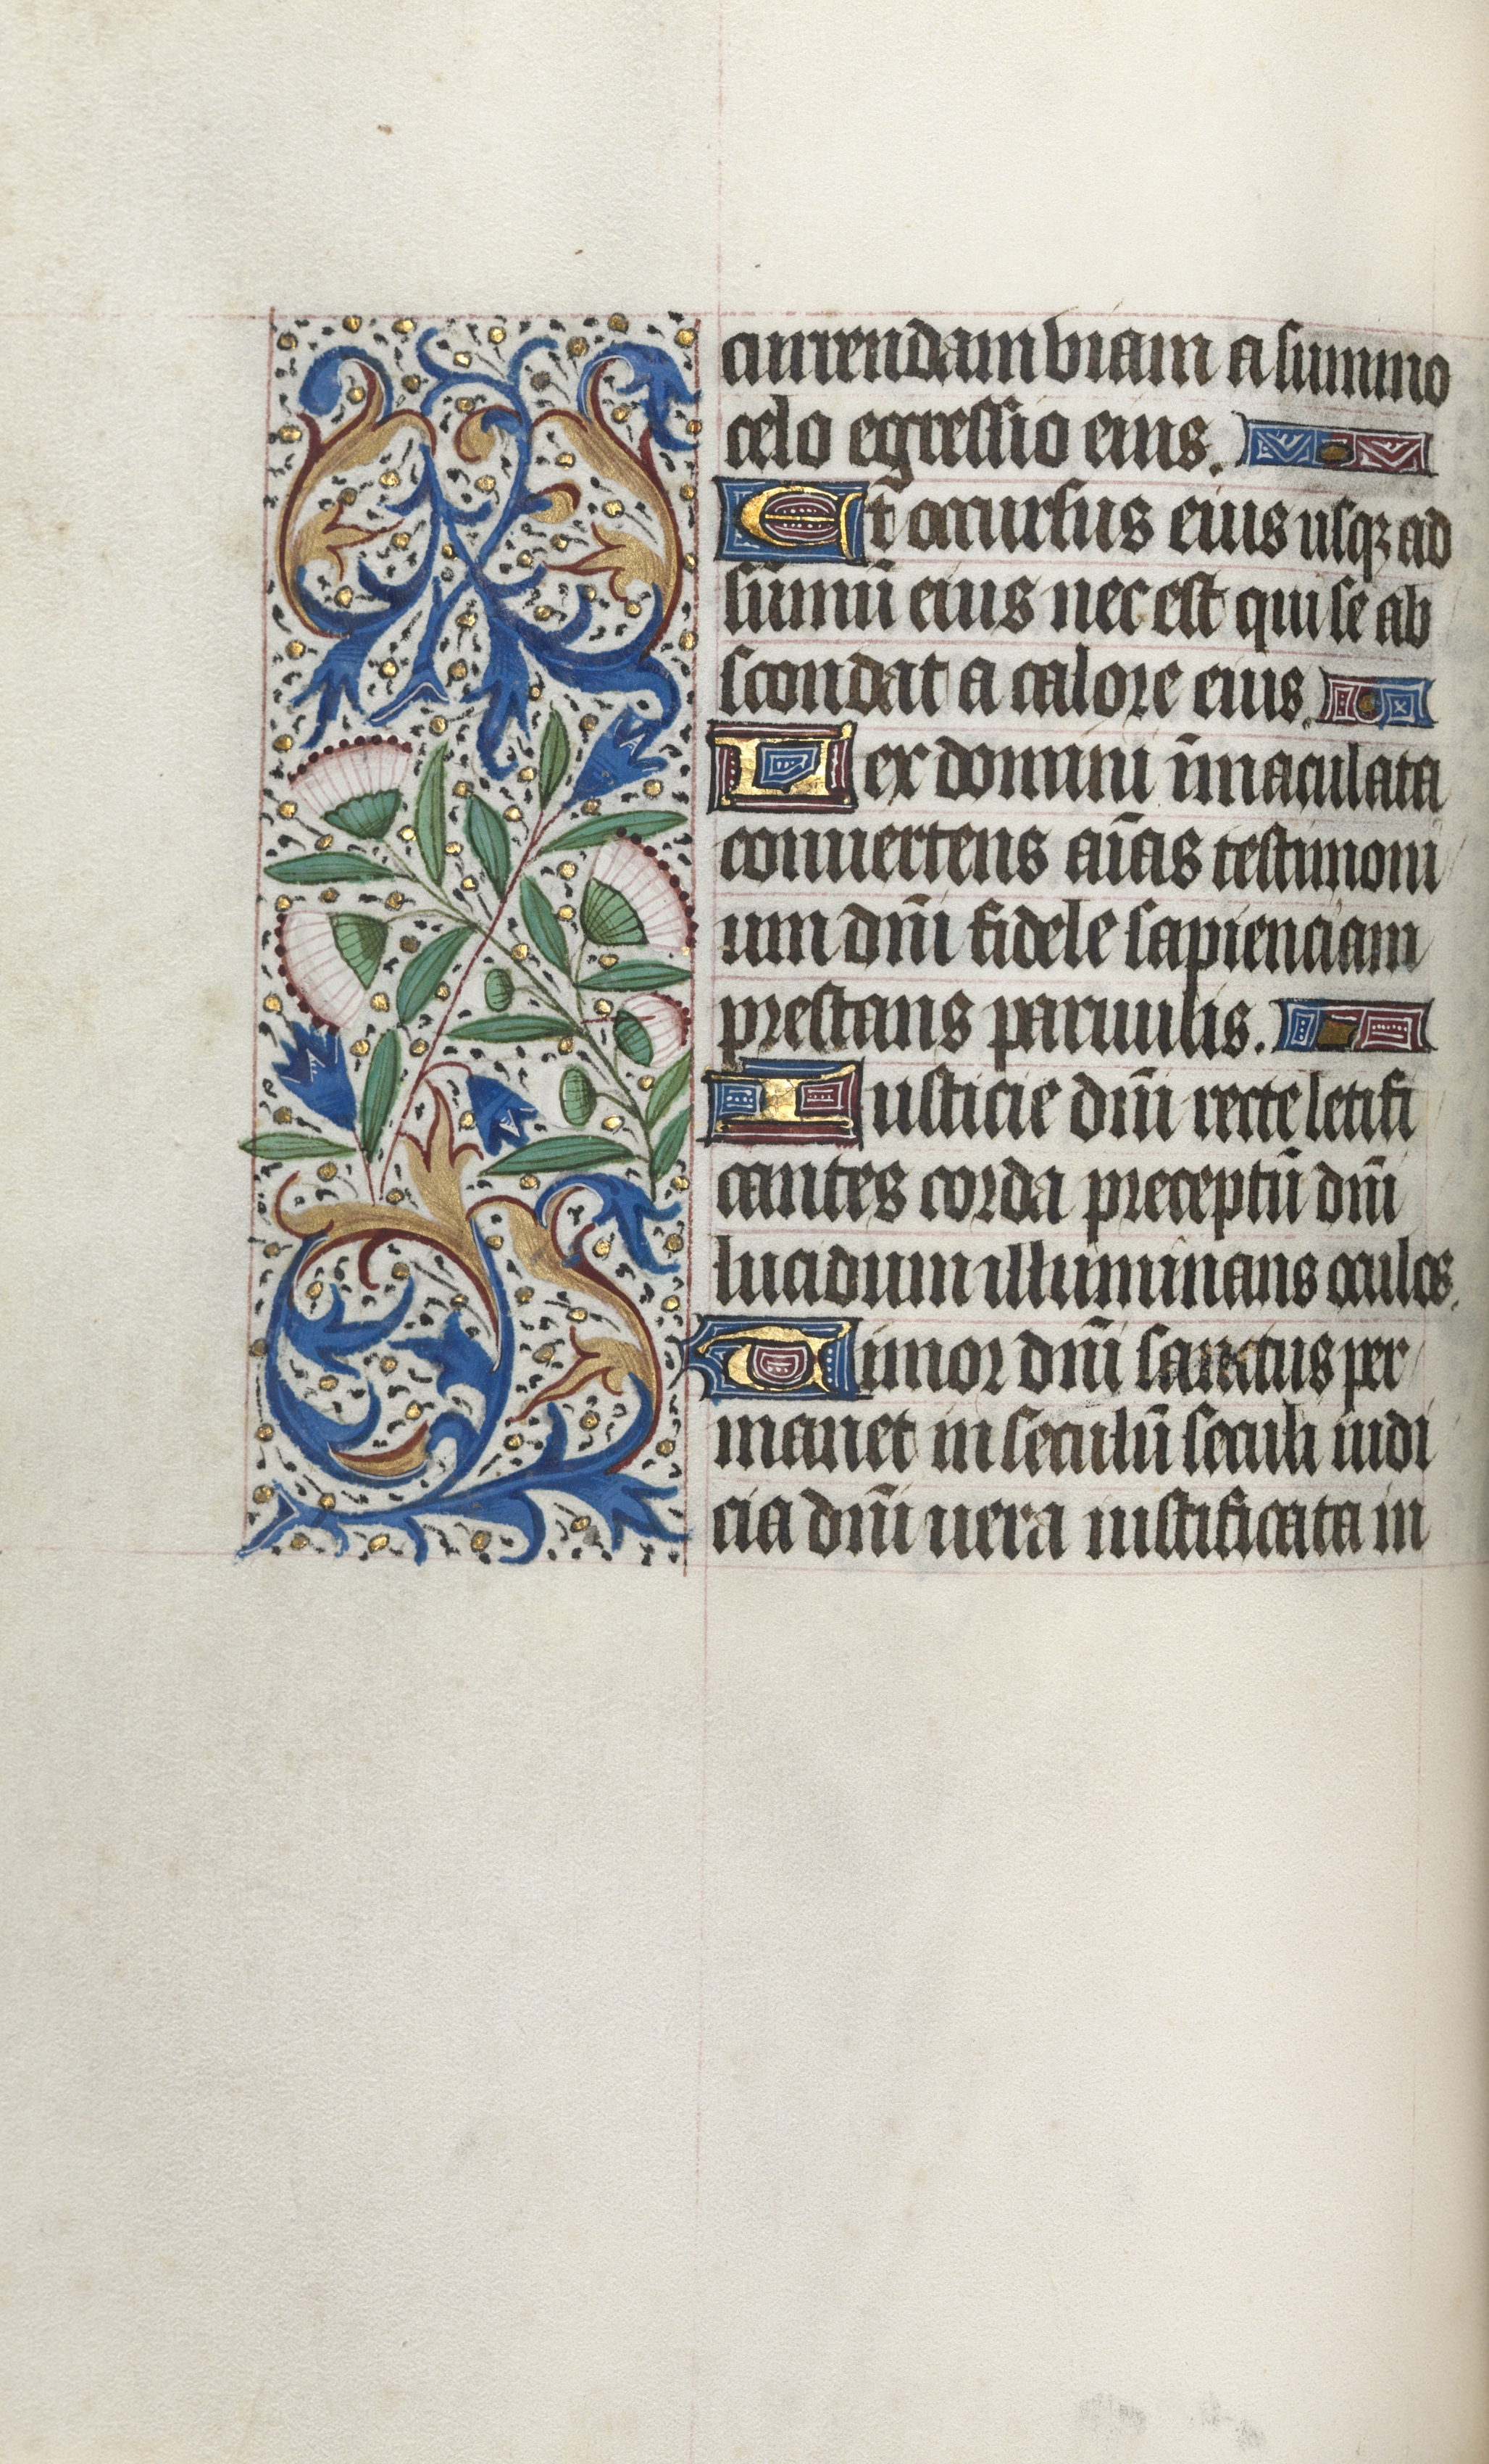 Book of Hours (Use of Rouen): fol. 32v